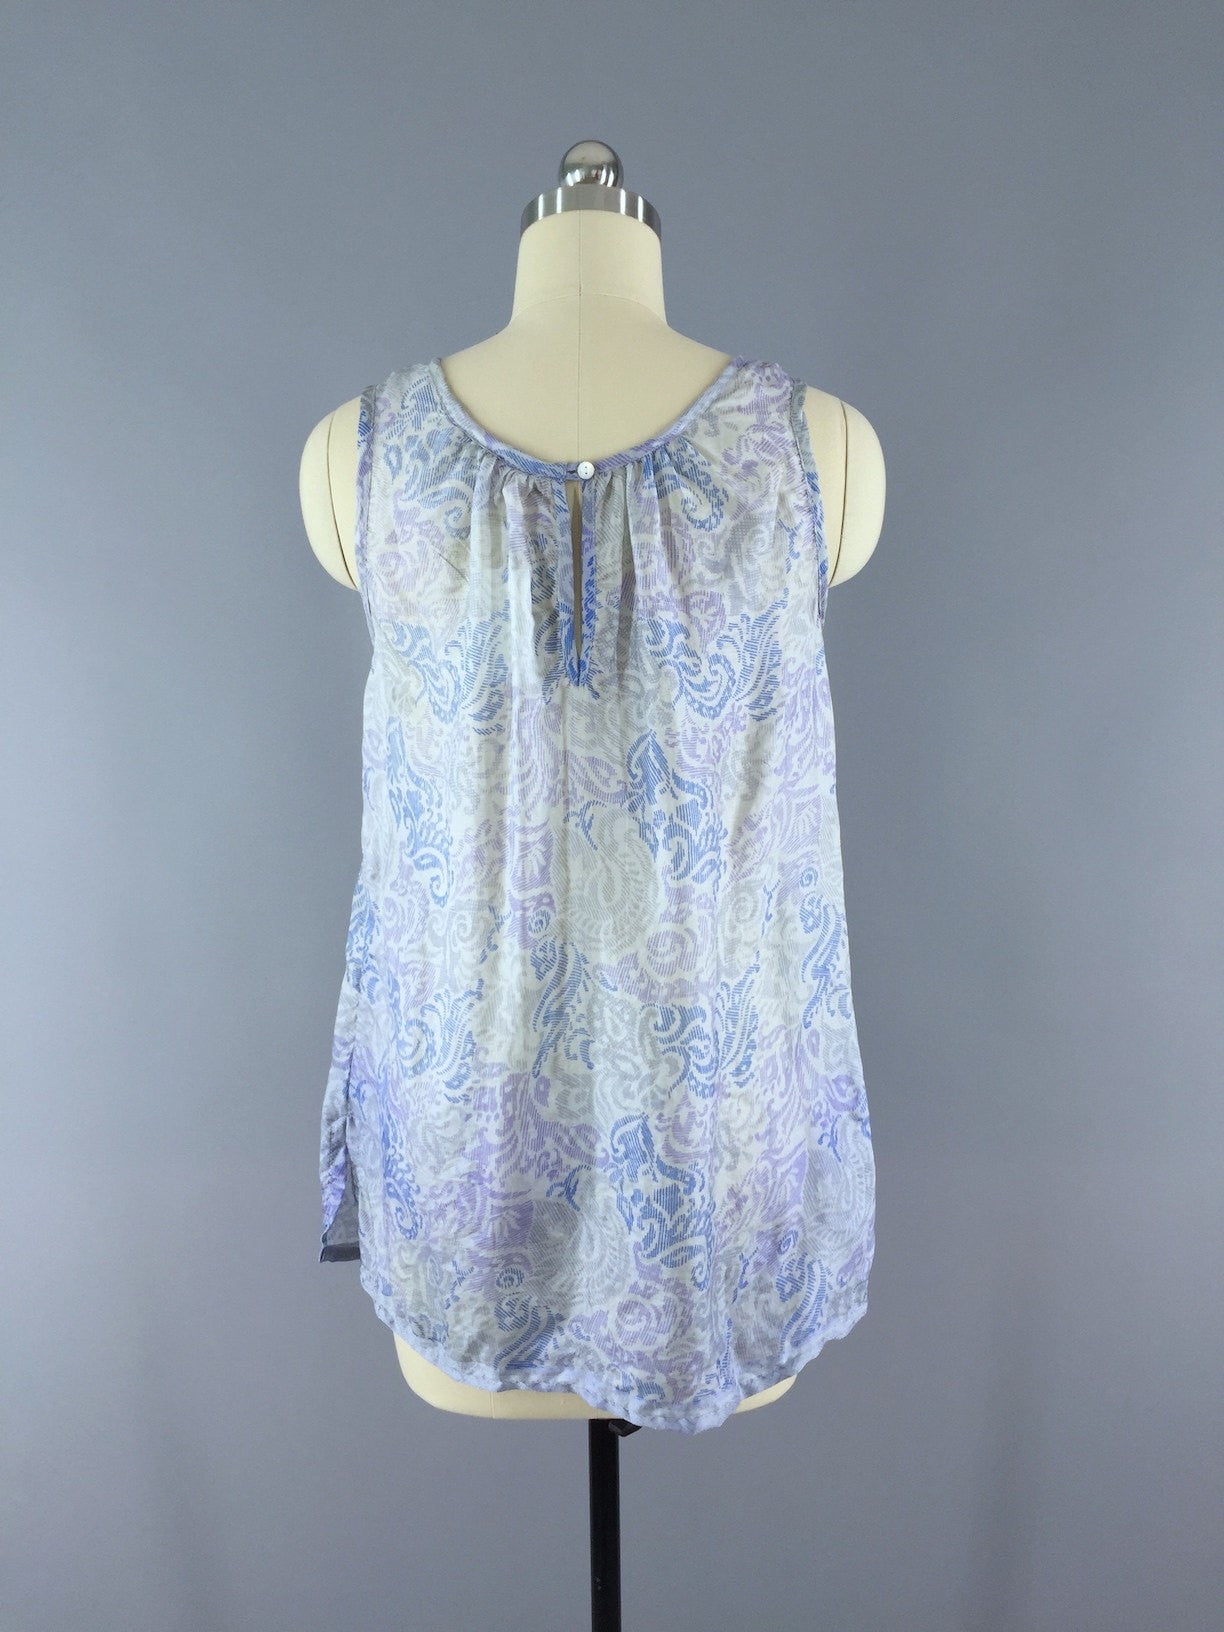 Silk Camisole Blouse / Vintage Indian Sari / Light Blue Floral / Size Small - ThisBlueBird